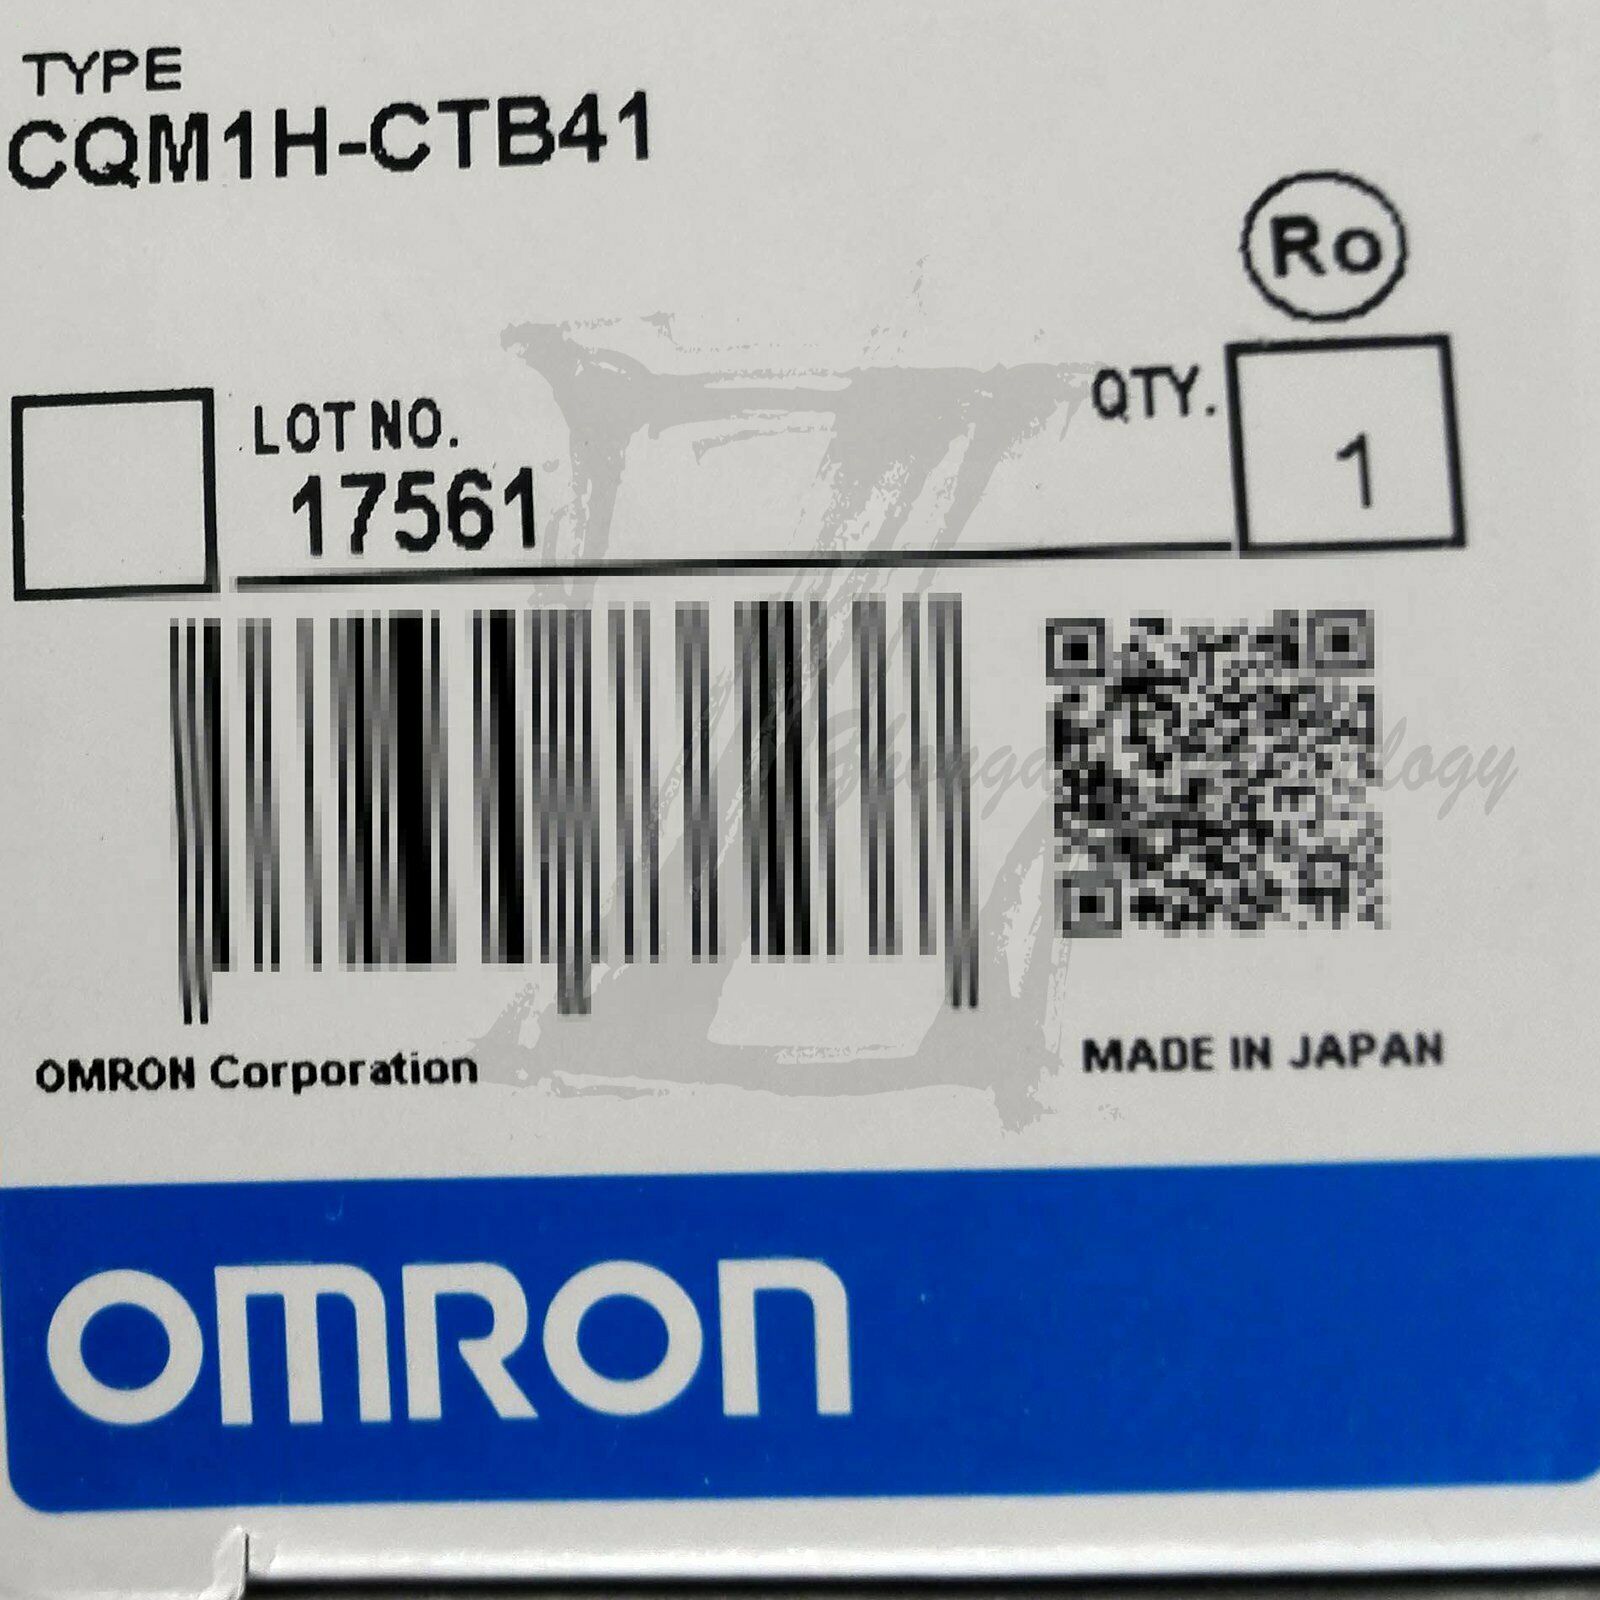 1pcs NEW IN BOX OMRON CQM1H-CTB41 Programmable Controller One year warranty KOEED 201-500, 80%, import_2020_10_10_031751, Omron, Other